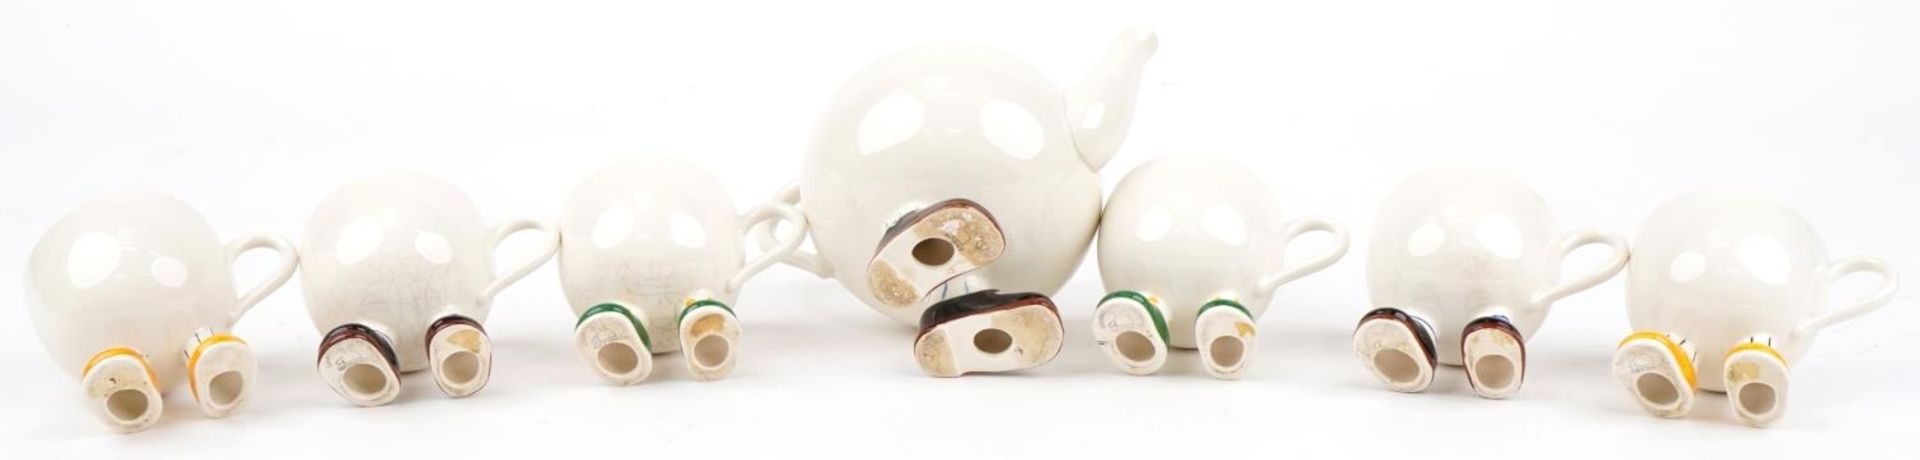 Carltonware Walking teaware comprising teapot and six cups, the largest 21cm in length - Image 9 of 12